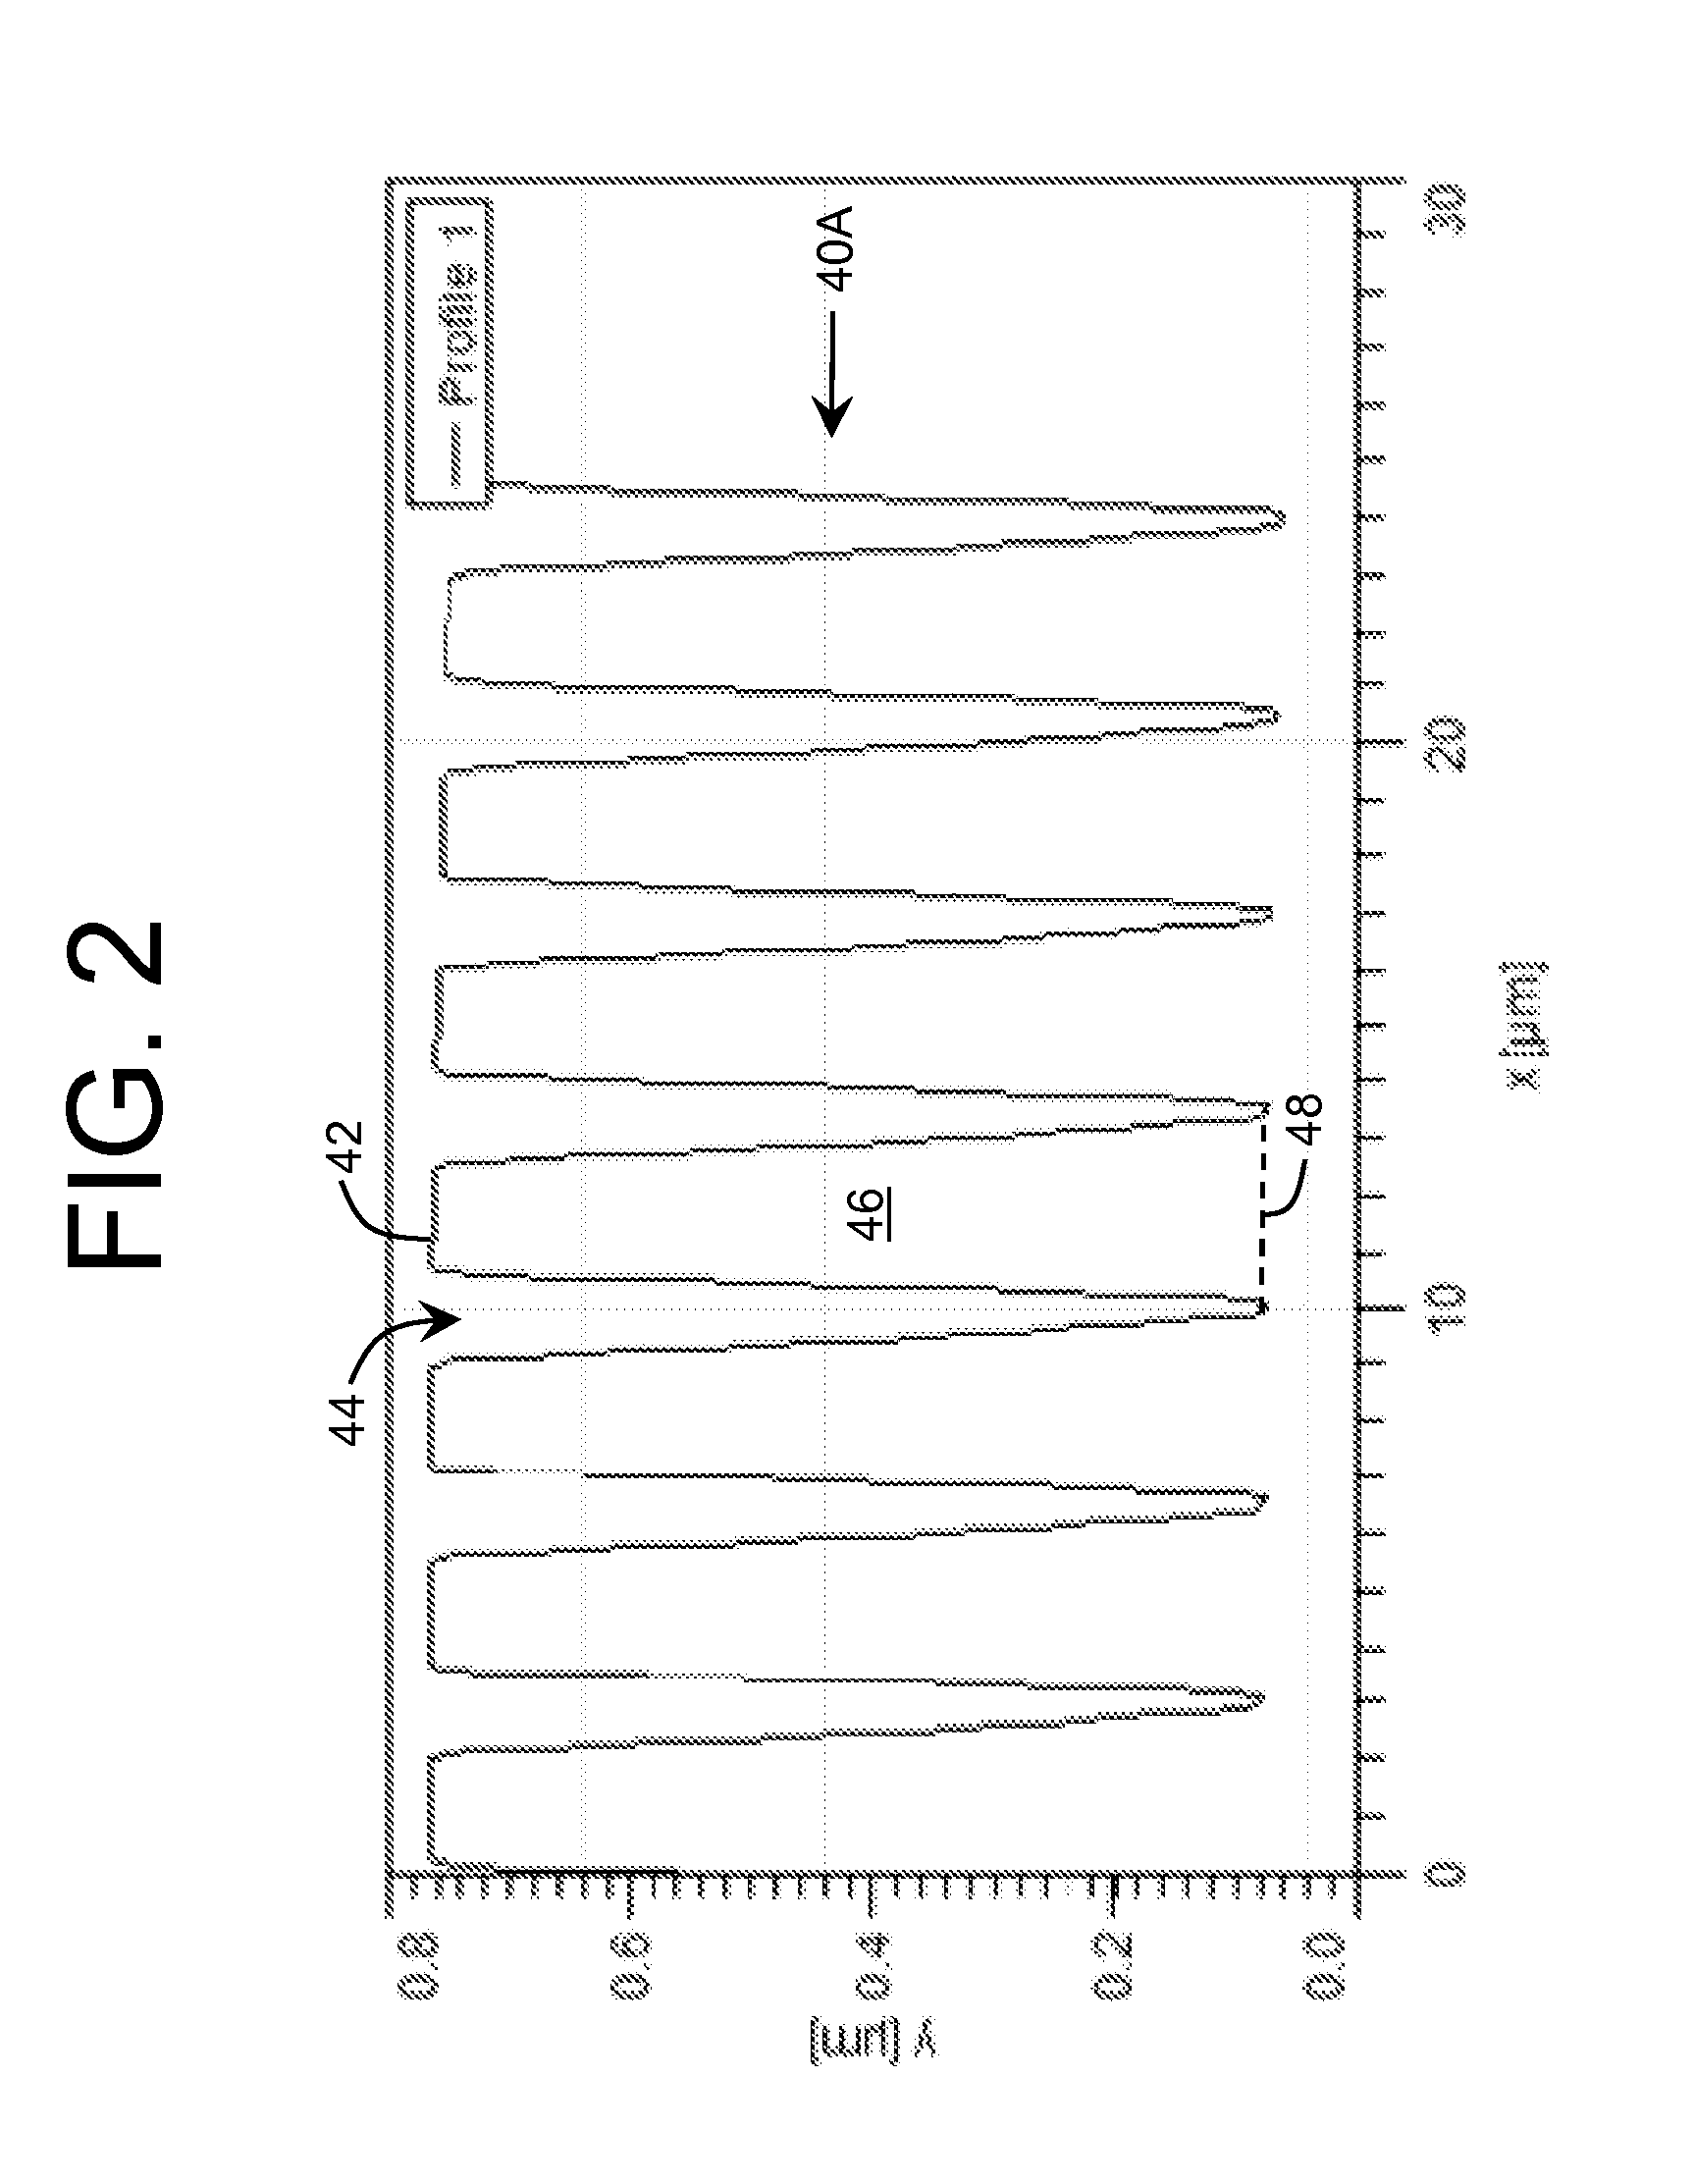 Patterned Substrate Design for Layer Growth